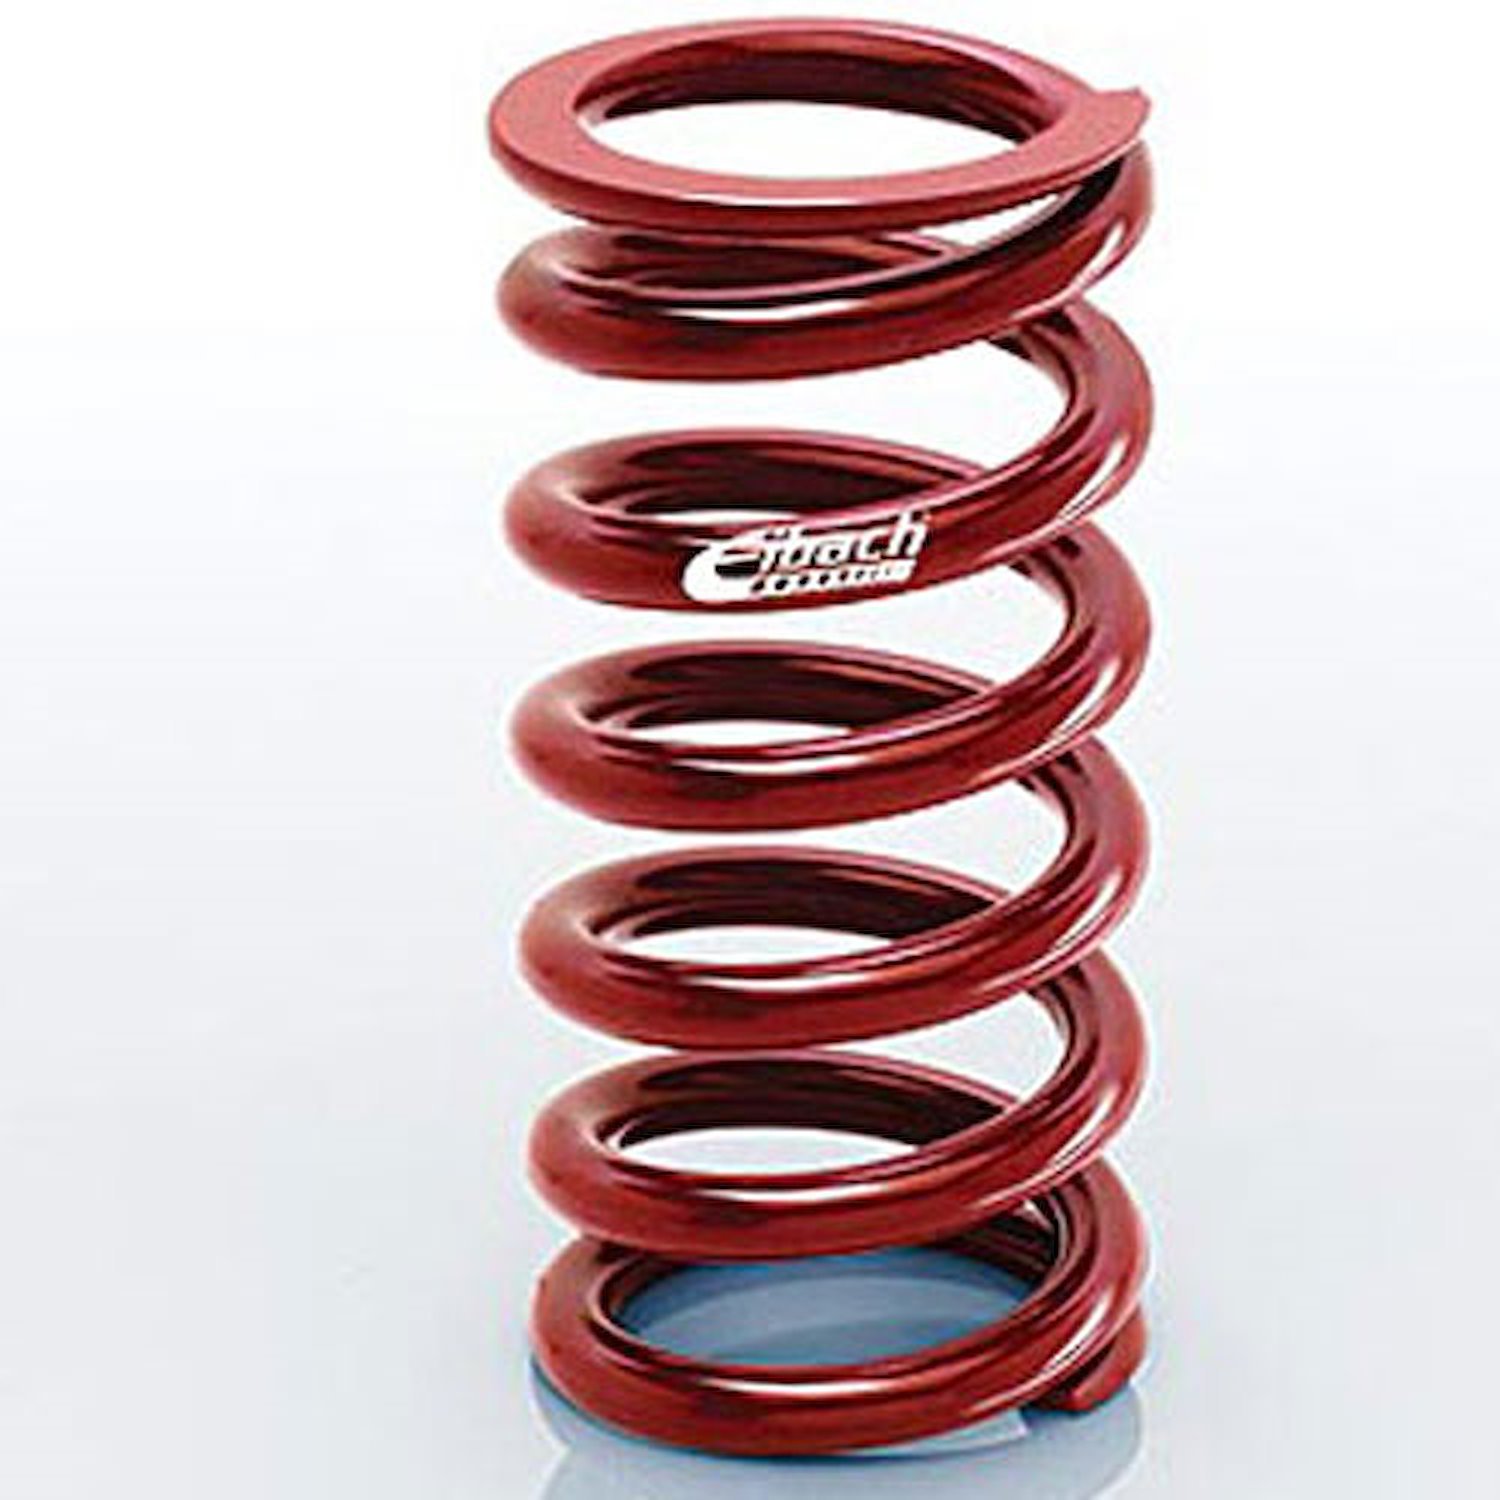 0950.500.0900 EIBACH CONVENTIONAL FRONT SPRING